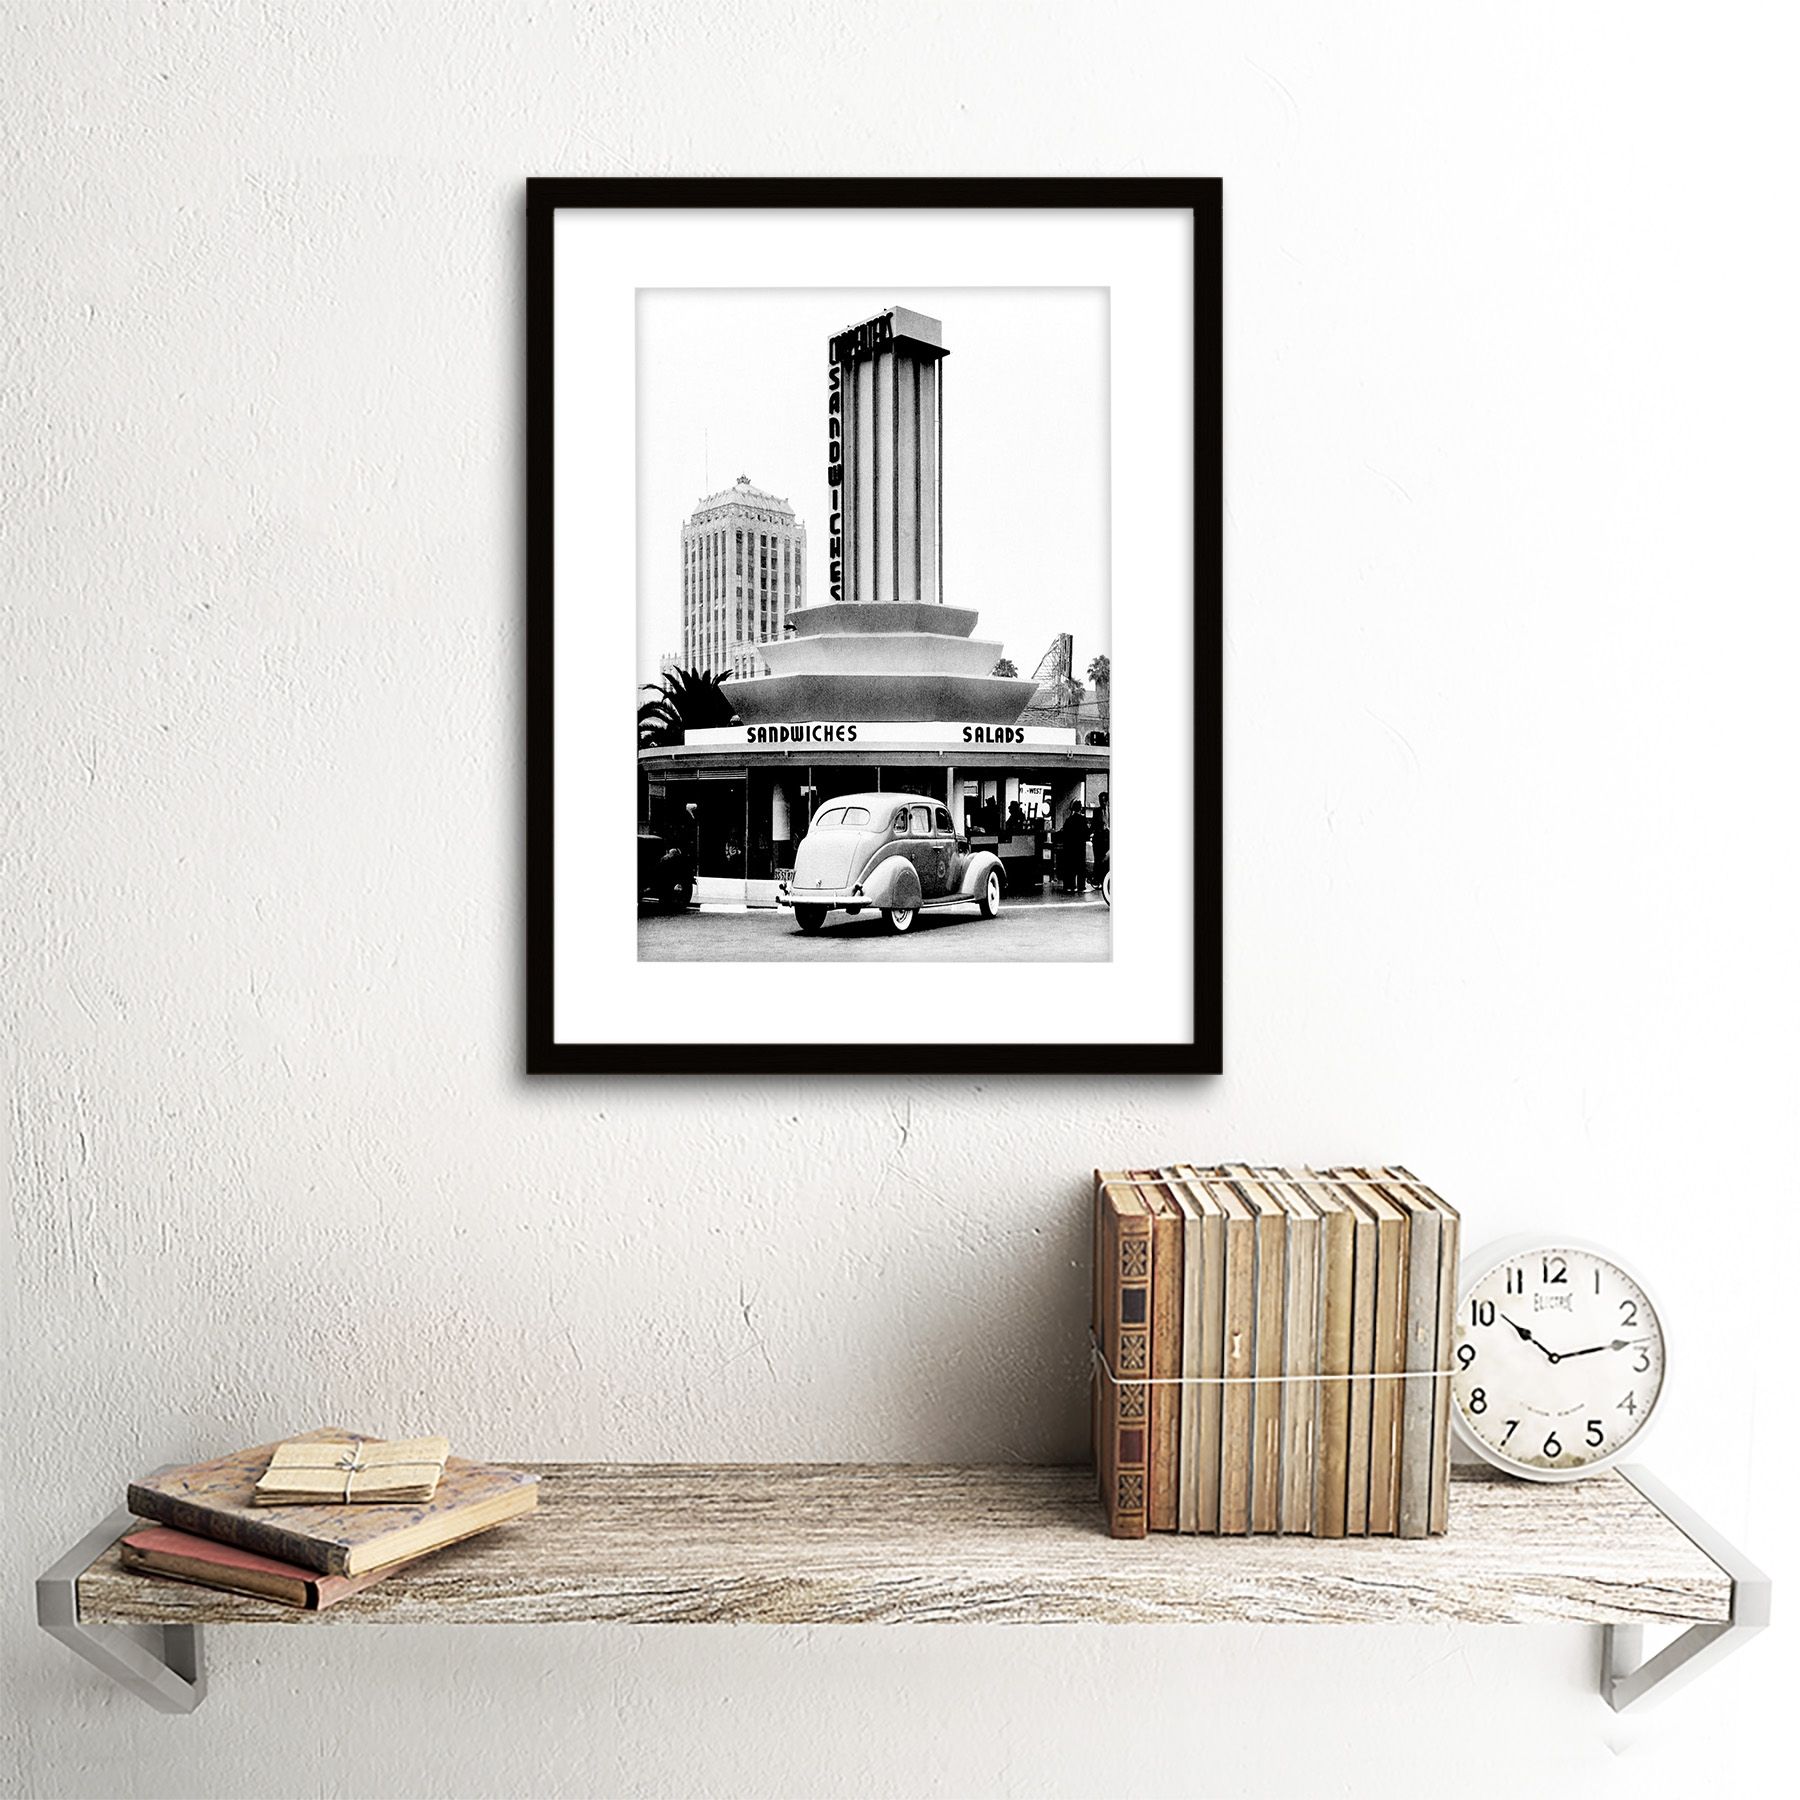 Vintage Sandwich Shop Los Angeles California Usa Framed Art Print Pertaining To Most Recent Los Angeles Framed Art Prints (View 1 of 15)